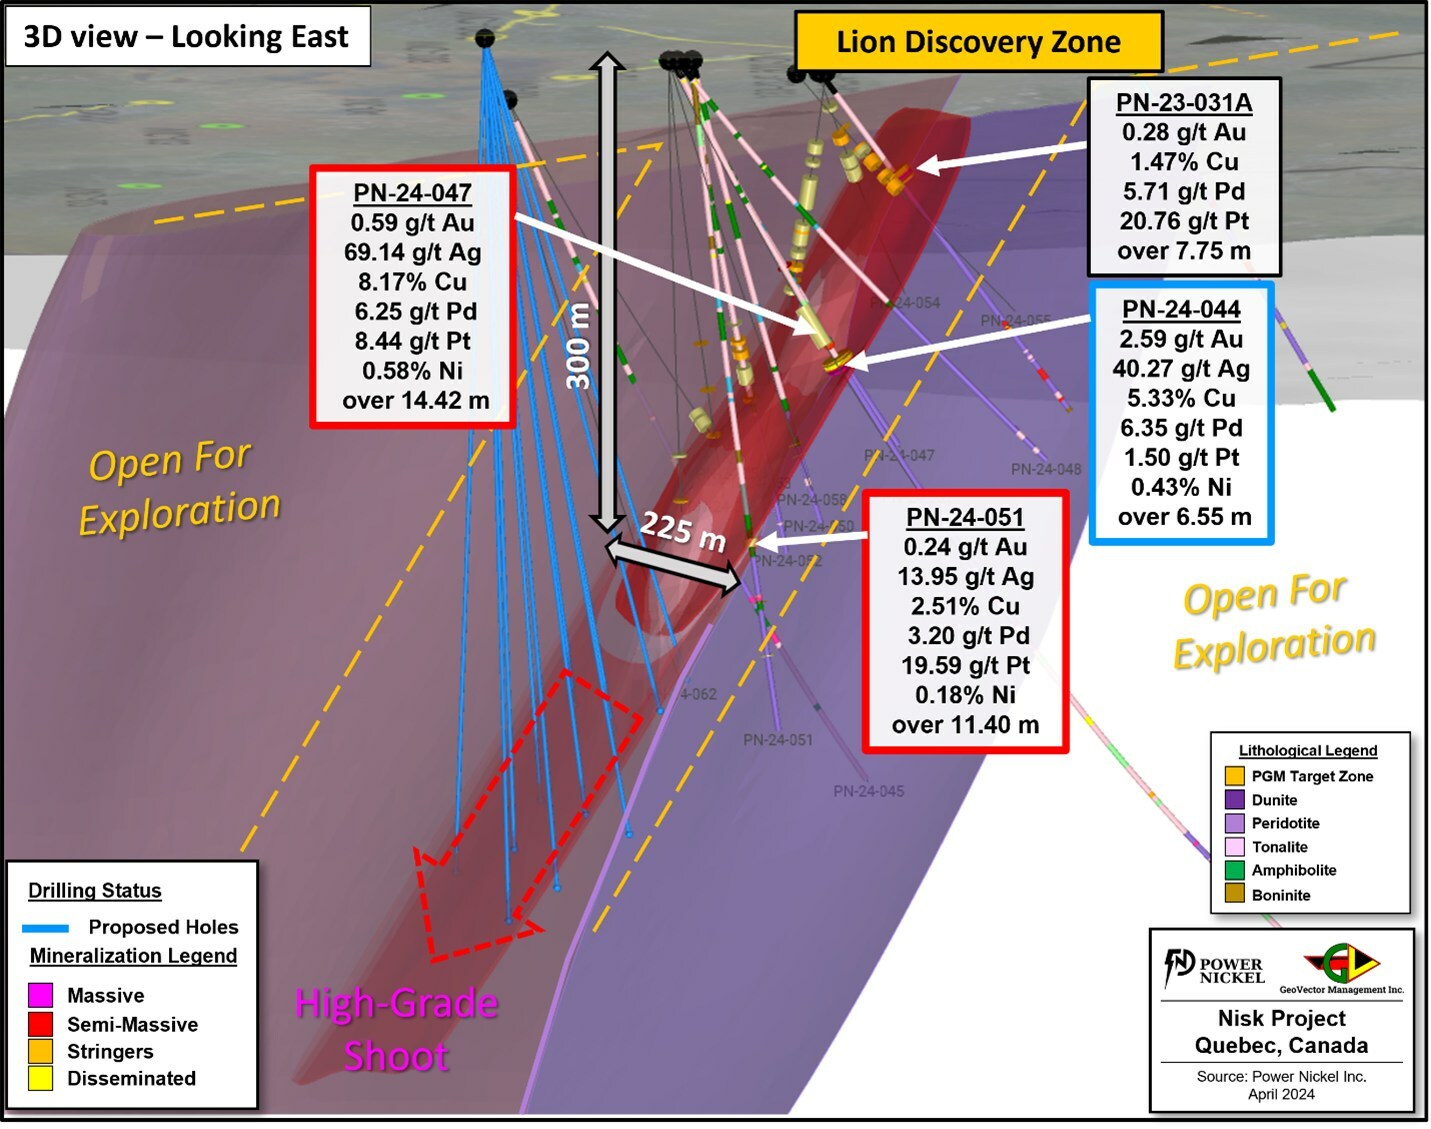 Figure 5: 3D view showing the current extent of drilling at Lion Discovery as well as some of the proposed holes for the upcoming summer drilling program.